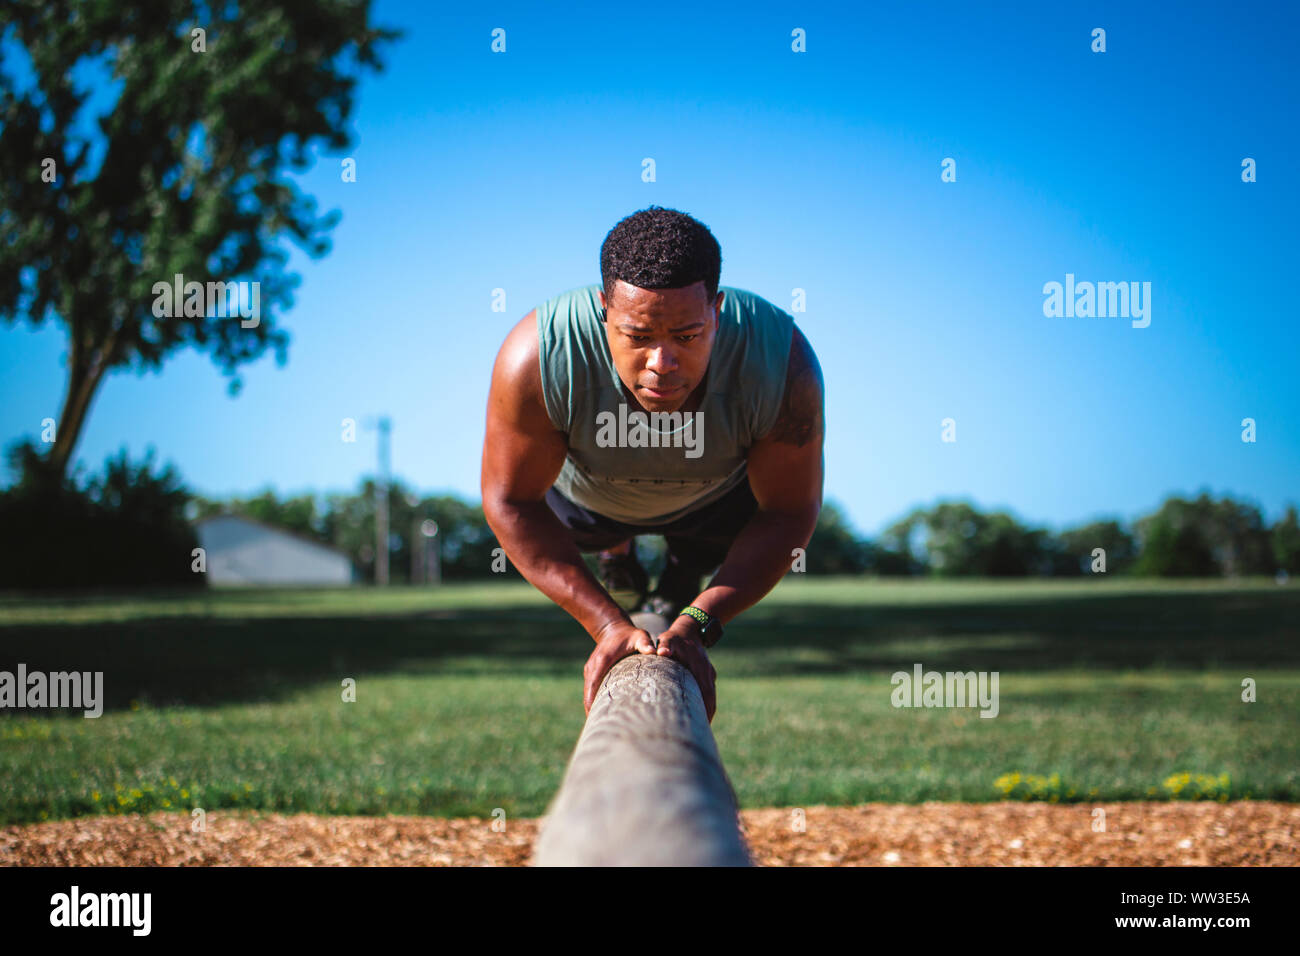 A strong athlete balances on single beam in park performing pushups Stock Photo